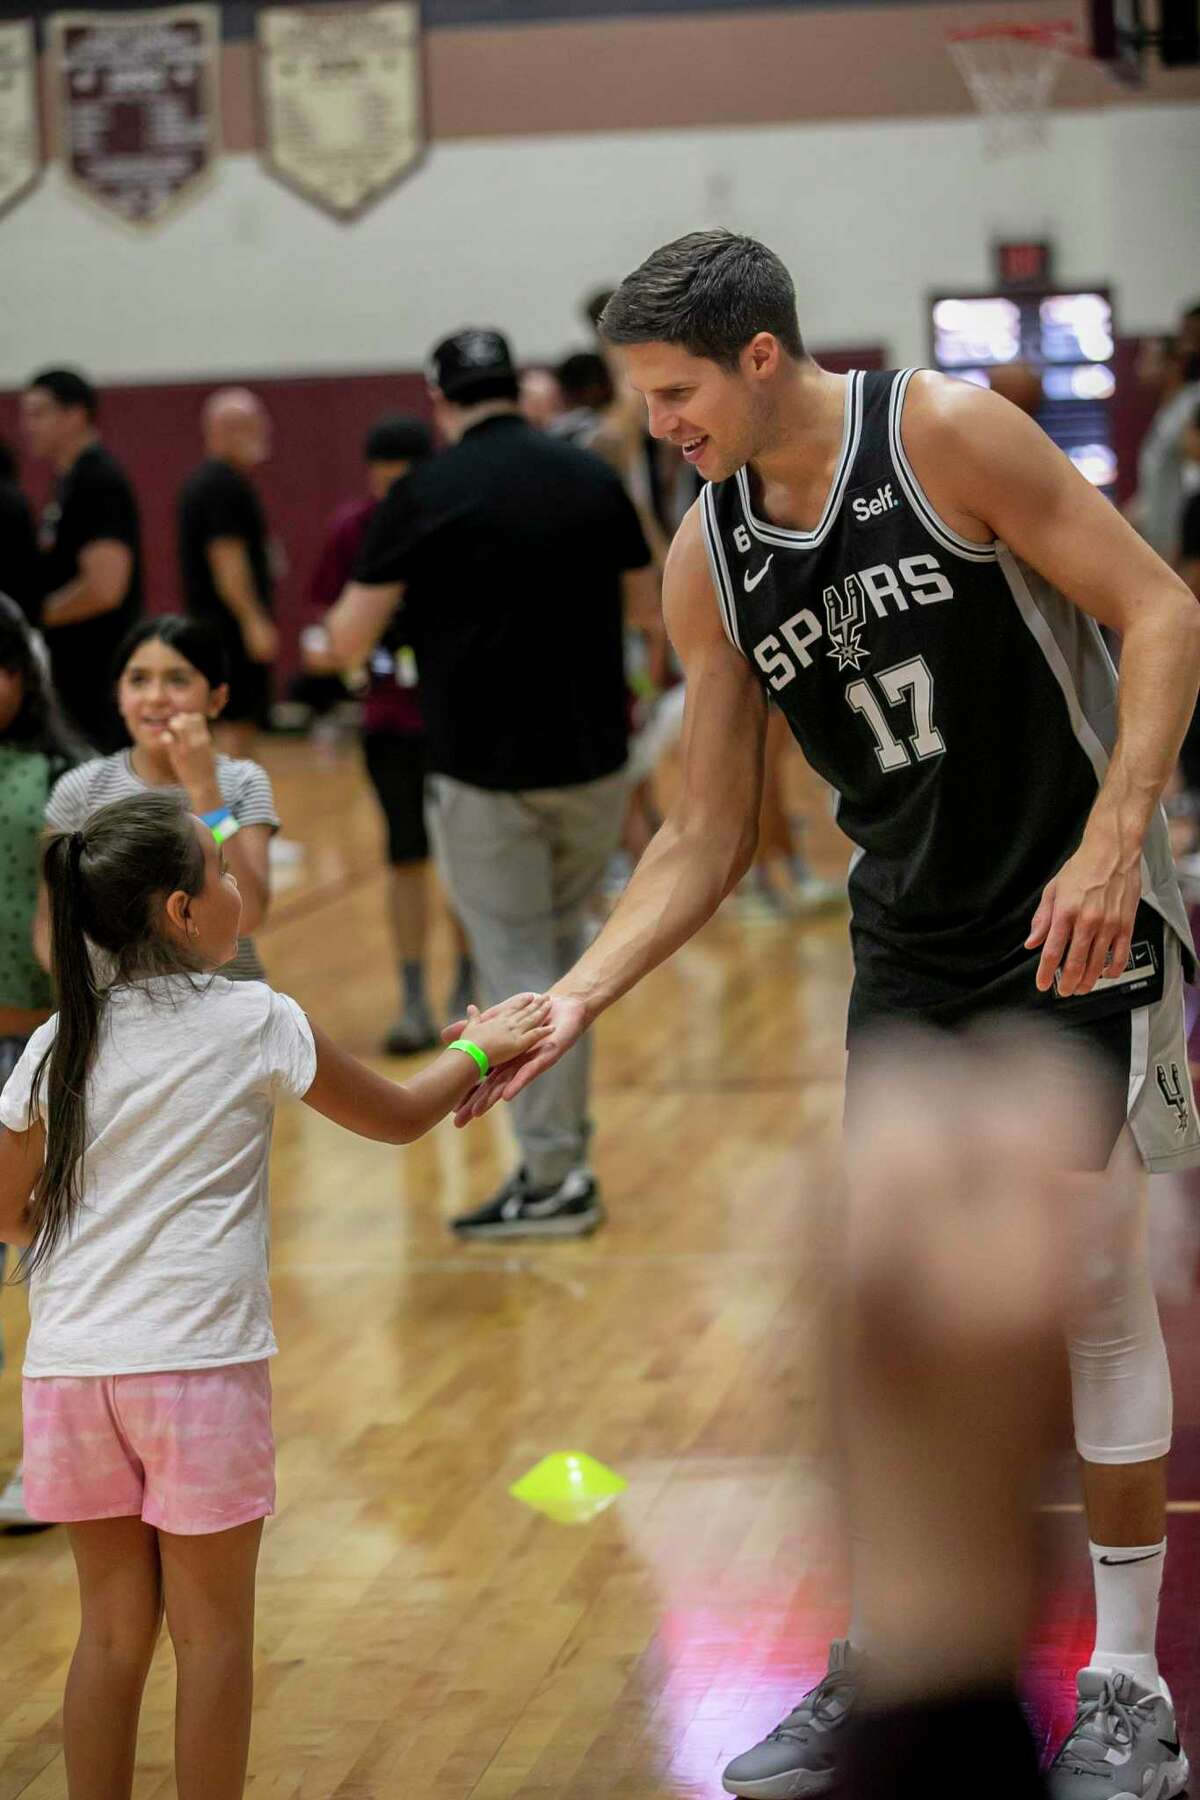 The Spurs’ Doug McDermott high fives a student during practice at Uvalde High School's Harvey Kinchlow Gym on Saturday.